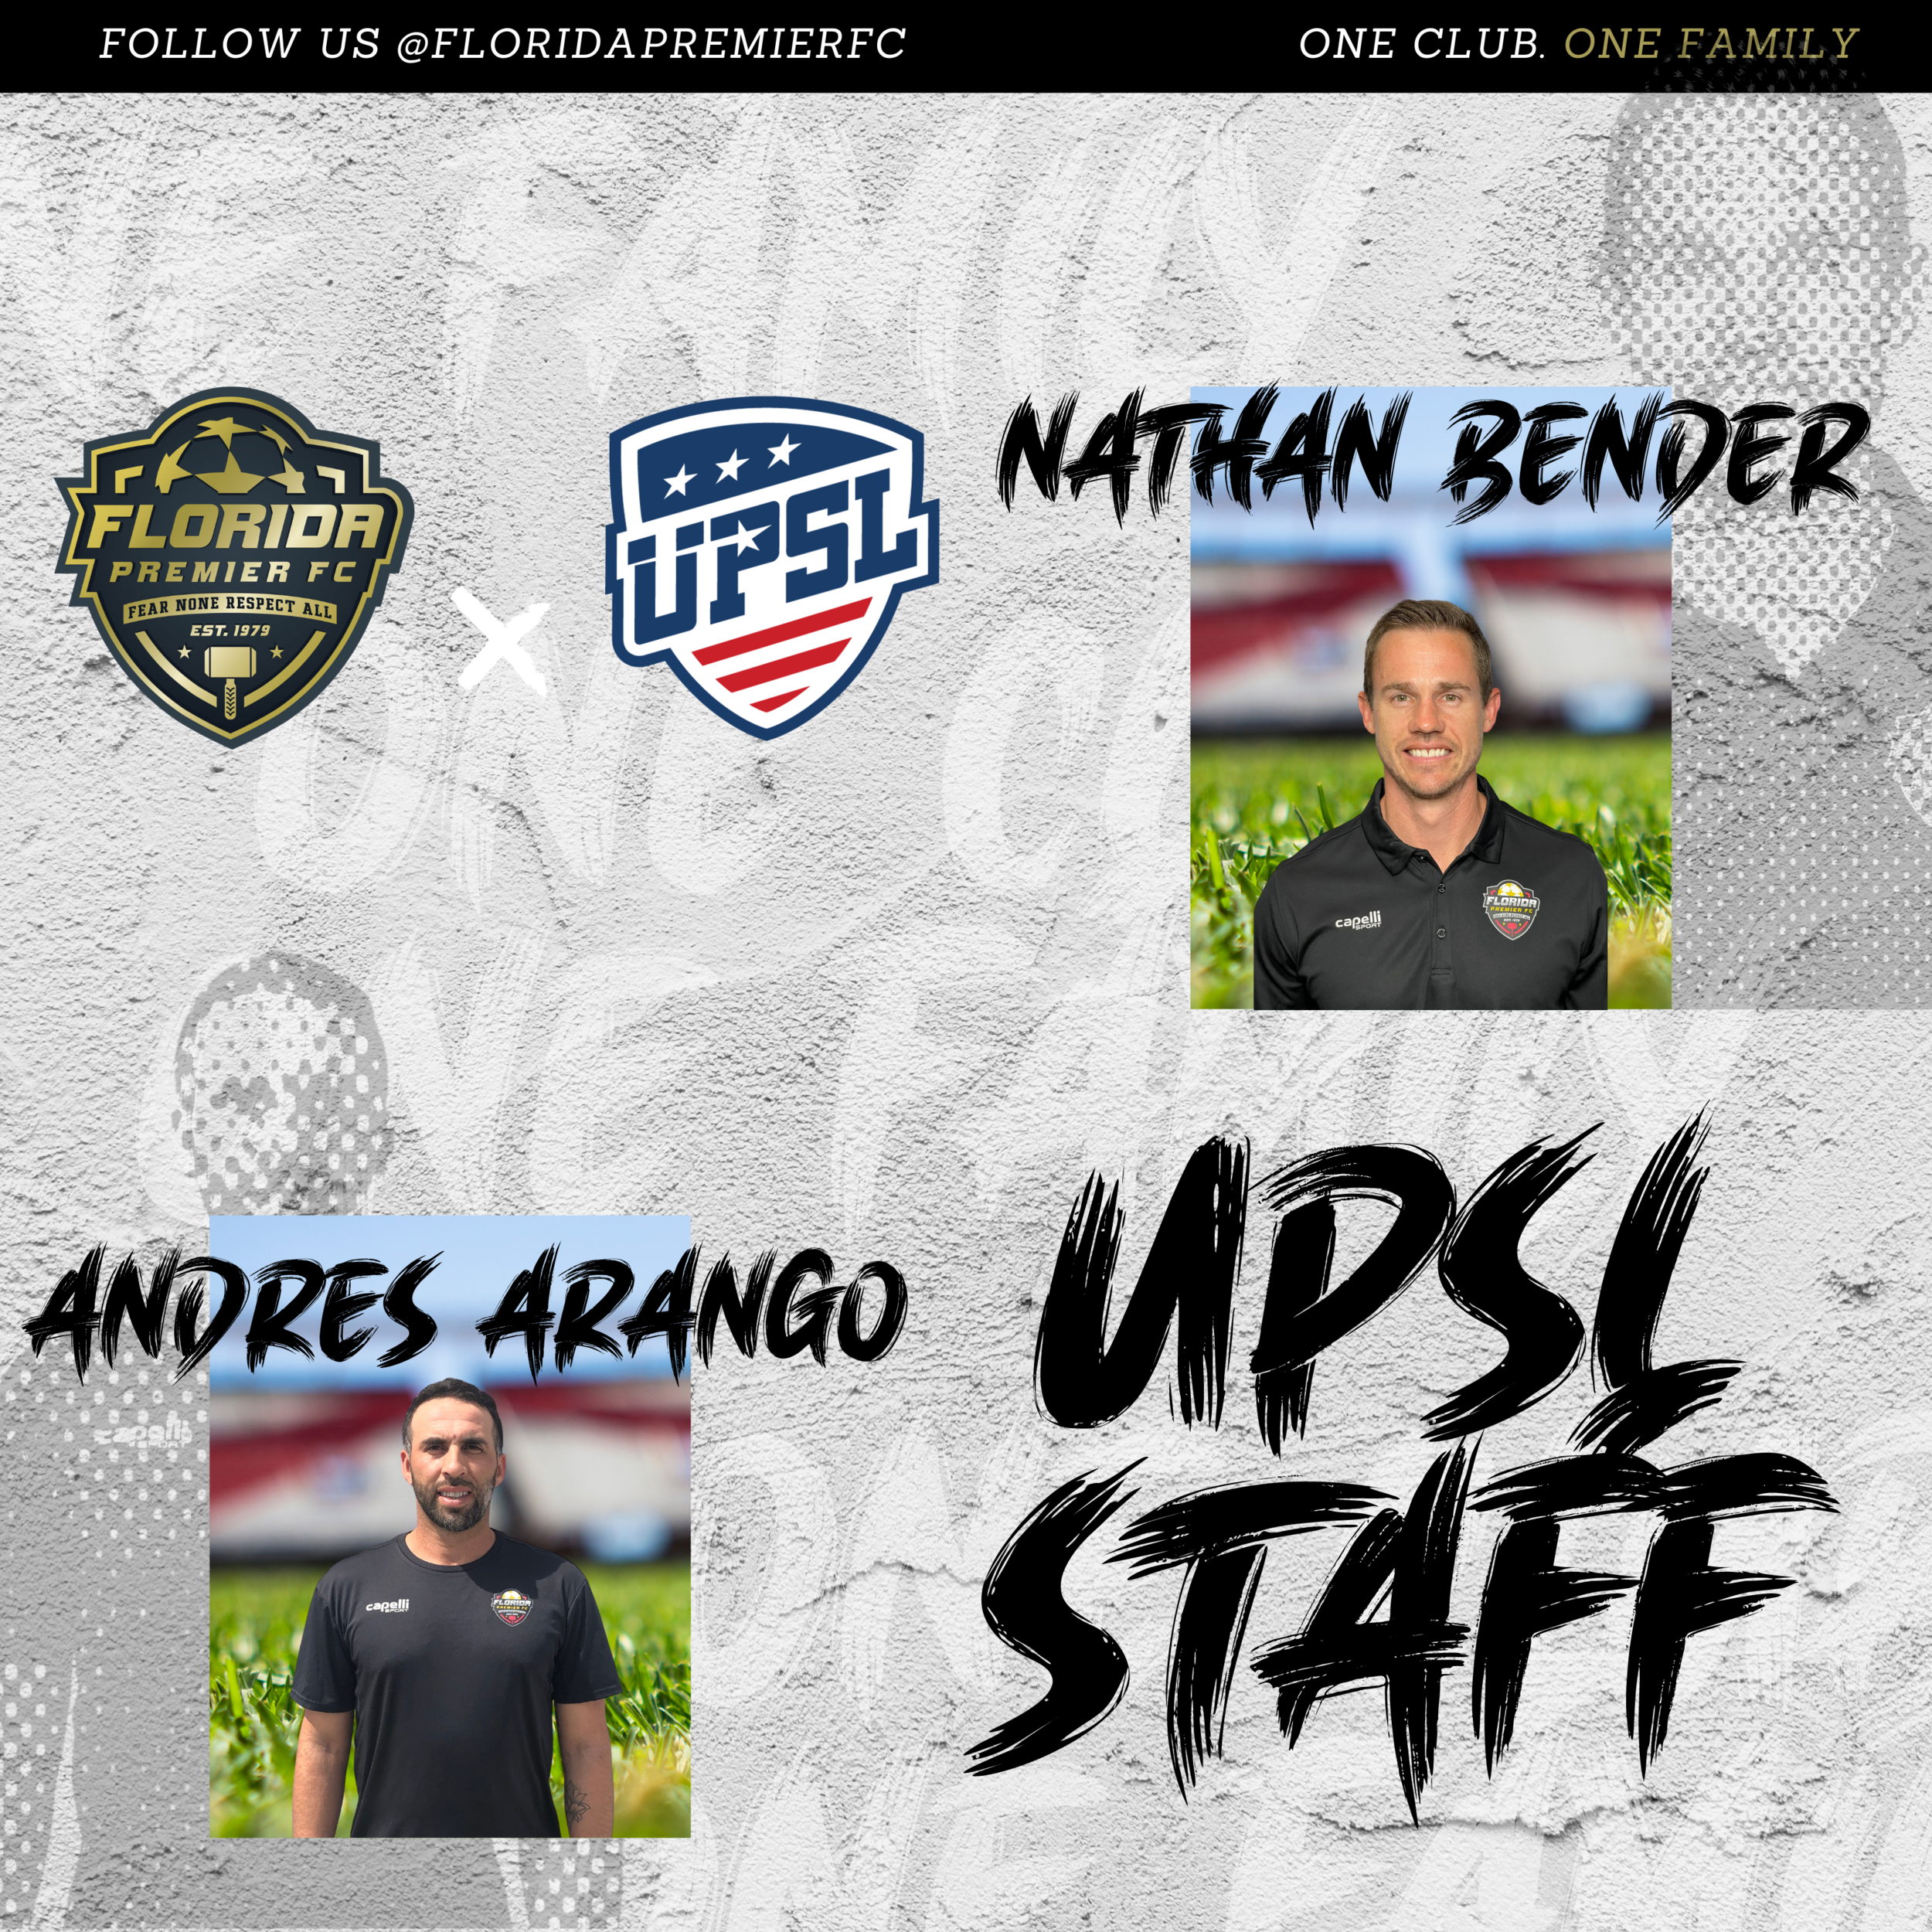 Welcome to the #UPSL, @clubnacional_tampabay 🆕🆕🆕 The United Premier  Soccer League is excited to announce Club Nacional De Football Tampa…